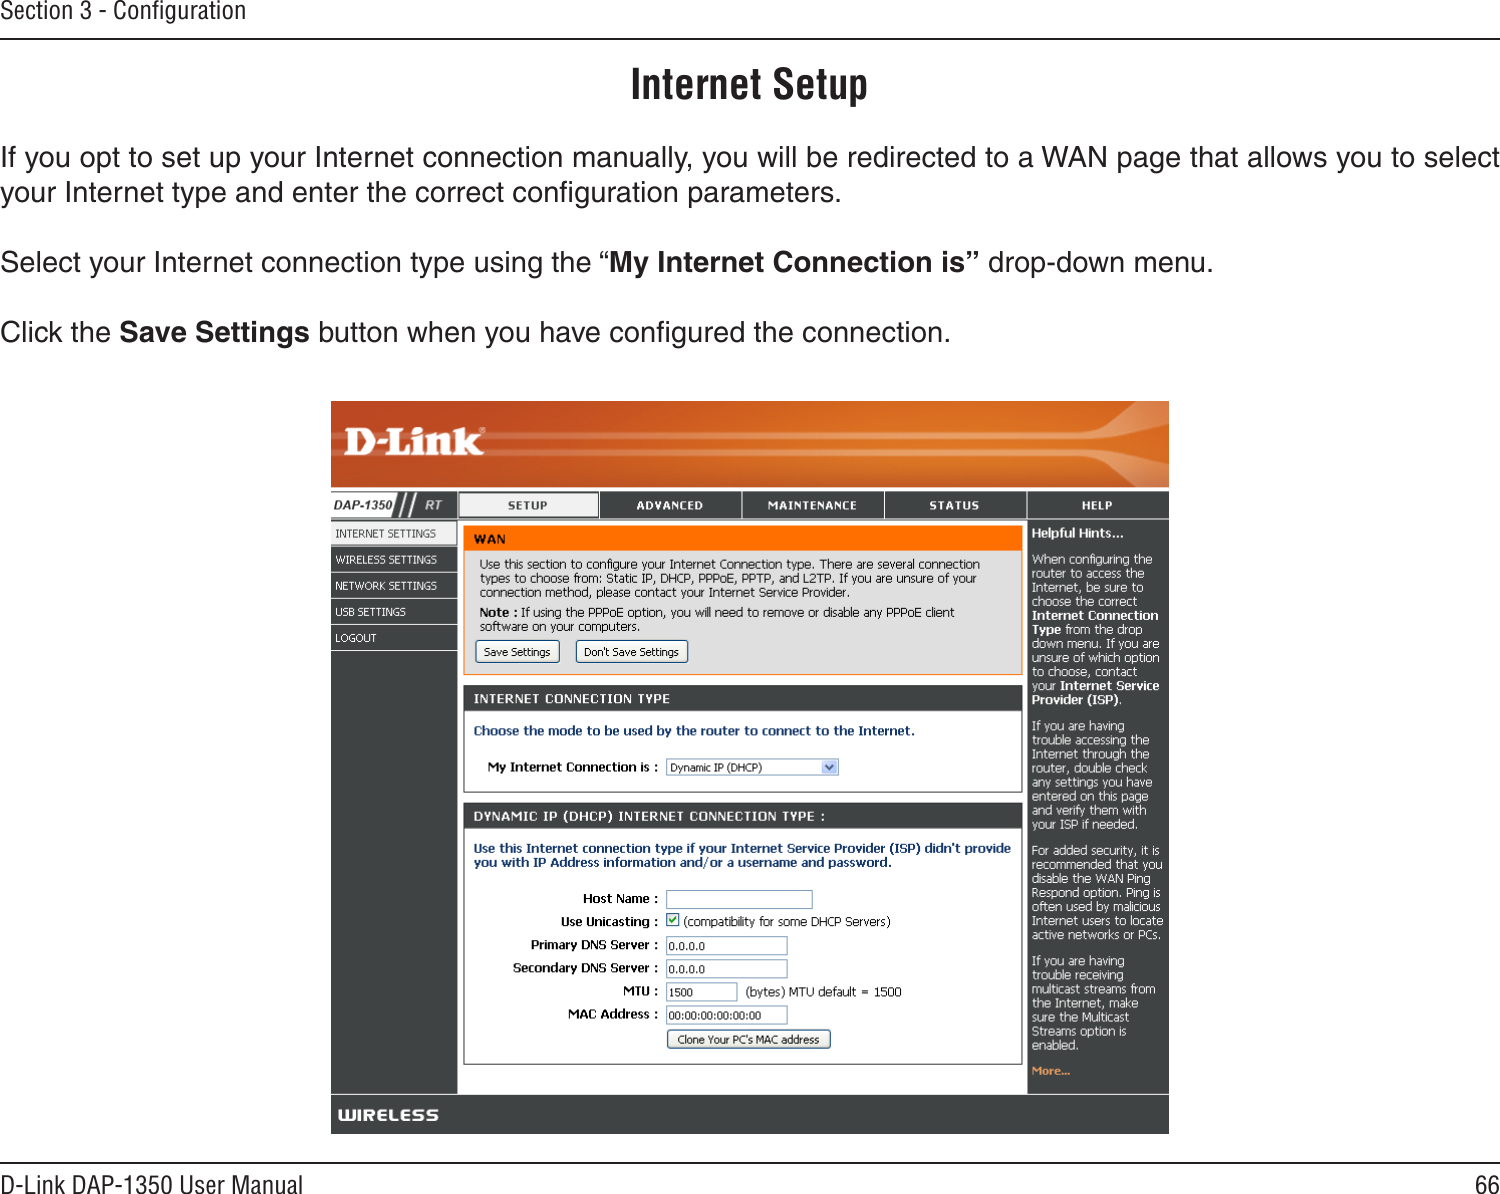 66D-Link DAP-1350 User ManualSection 3 - ConﬁgurationInternet SetupIf you opt to set up your Internet connection manually, you will be redirected to a WAN page that allows you to select your Internet type and enter the correct conﬁguration parameters.Select your Internet connection type using the “My Internet Connection is” drop-down menu.Click the Save Settings button when you have conﬁgured the connection.